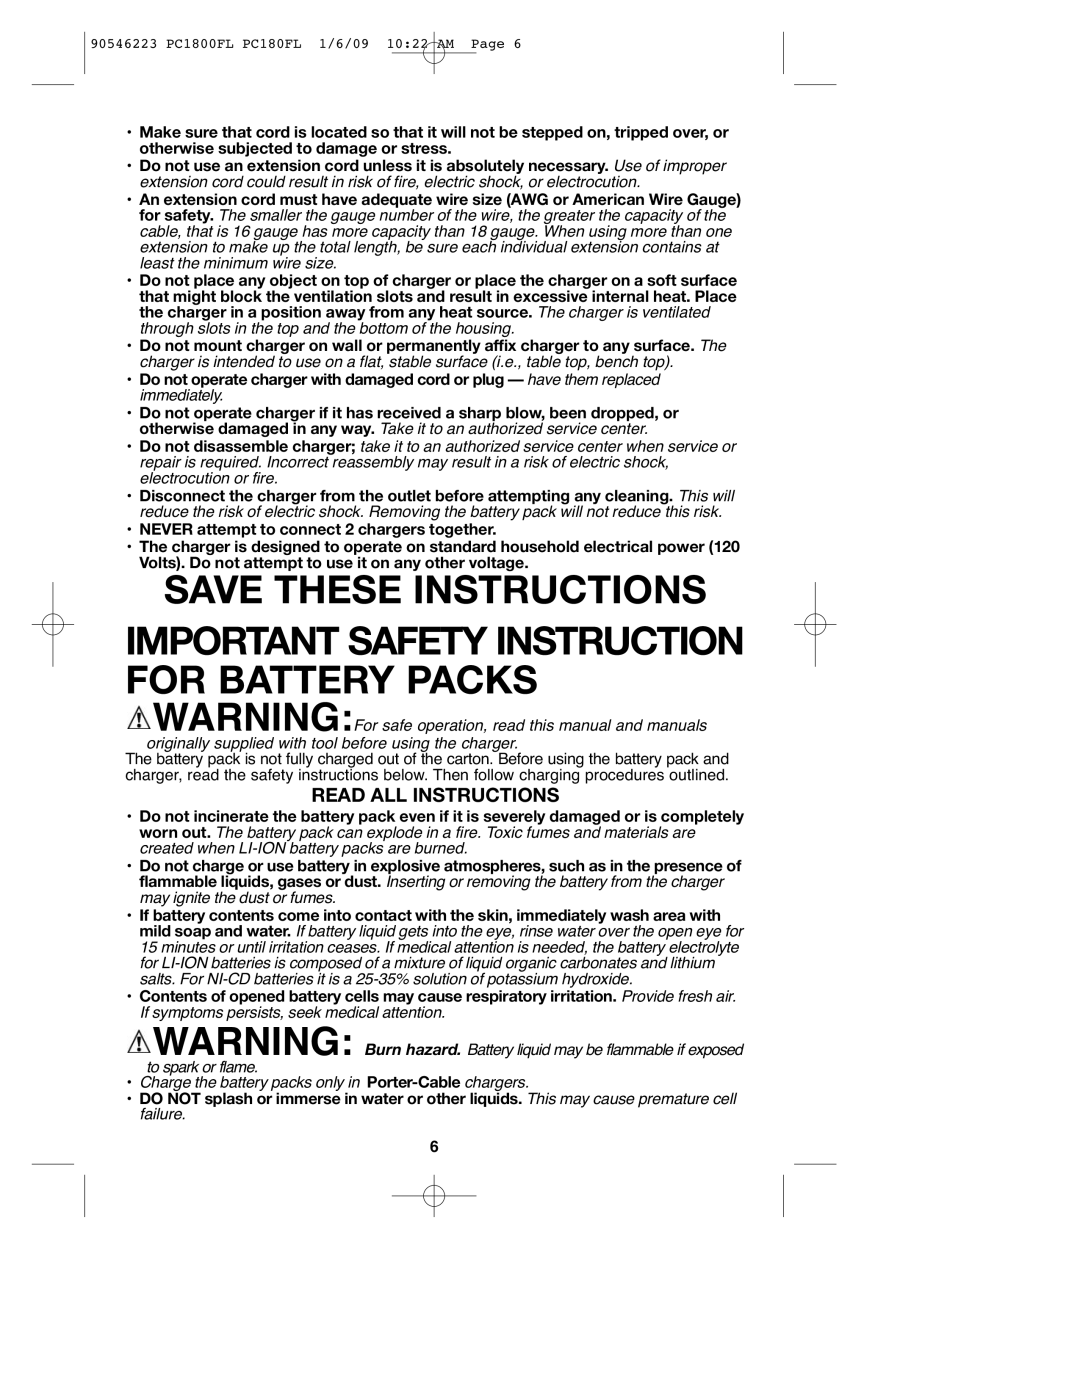 Porter-Cable 90546223 Important Safety Instruction For Battery Packs, Read All Instructions, Save These Instructions 